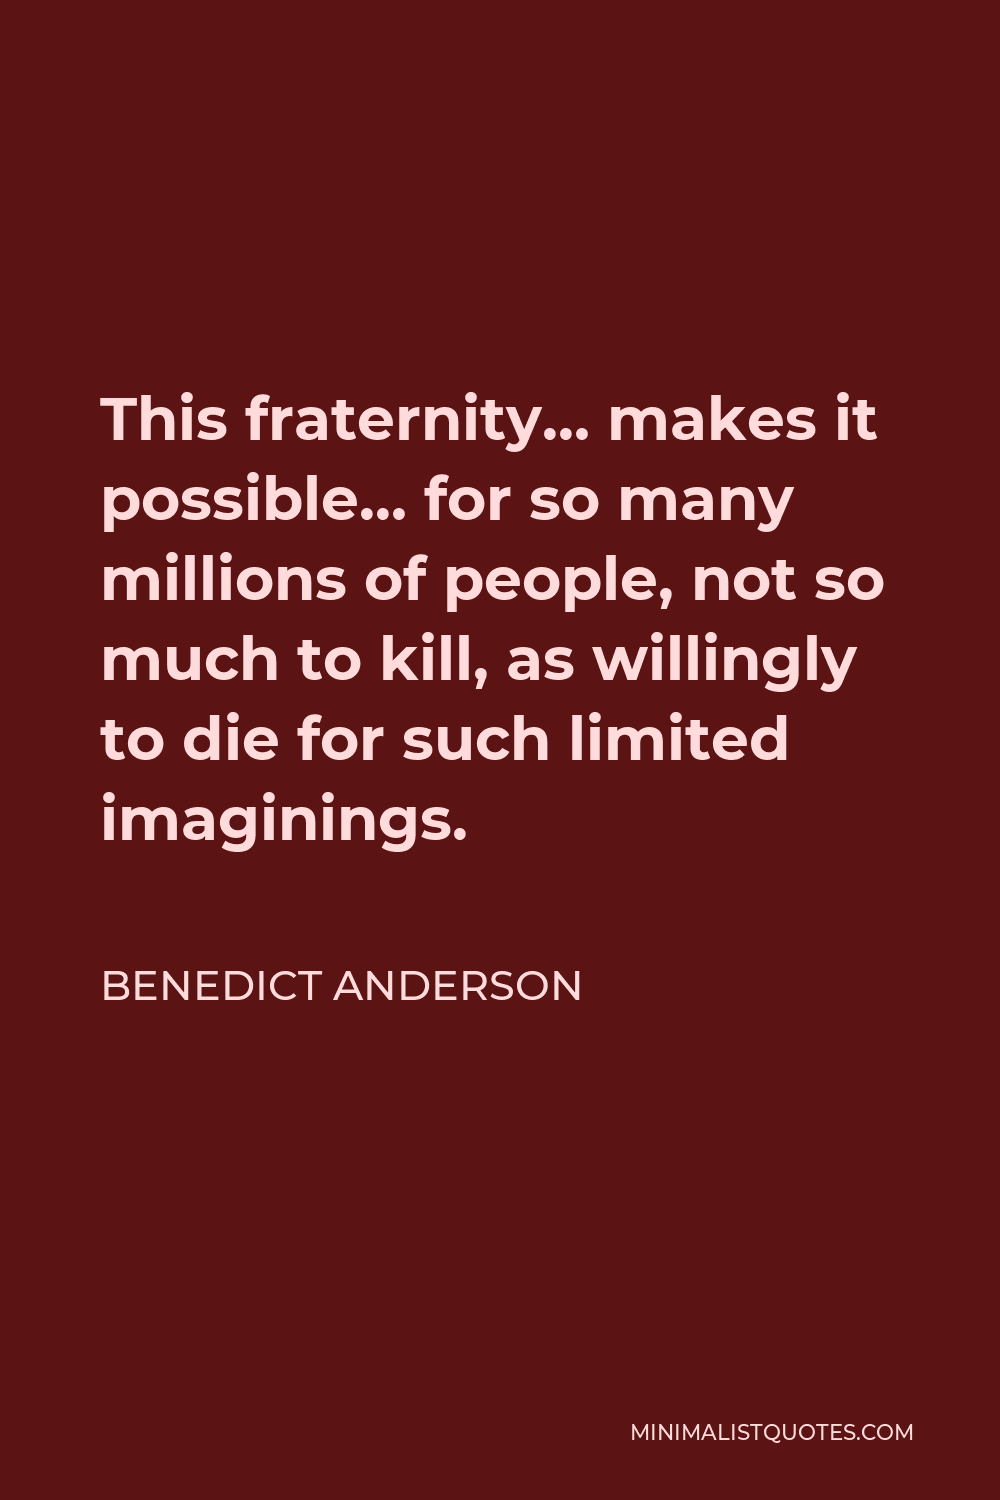 Benedict Anderson Quote - This fraternity… makes it possible… for so many millions of people, not so much to kill, as willingly to die for such limited imaginings.